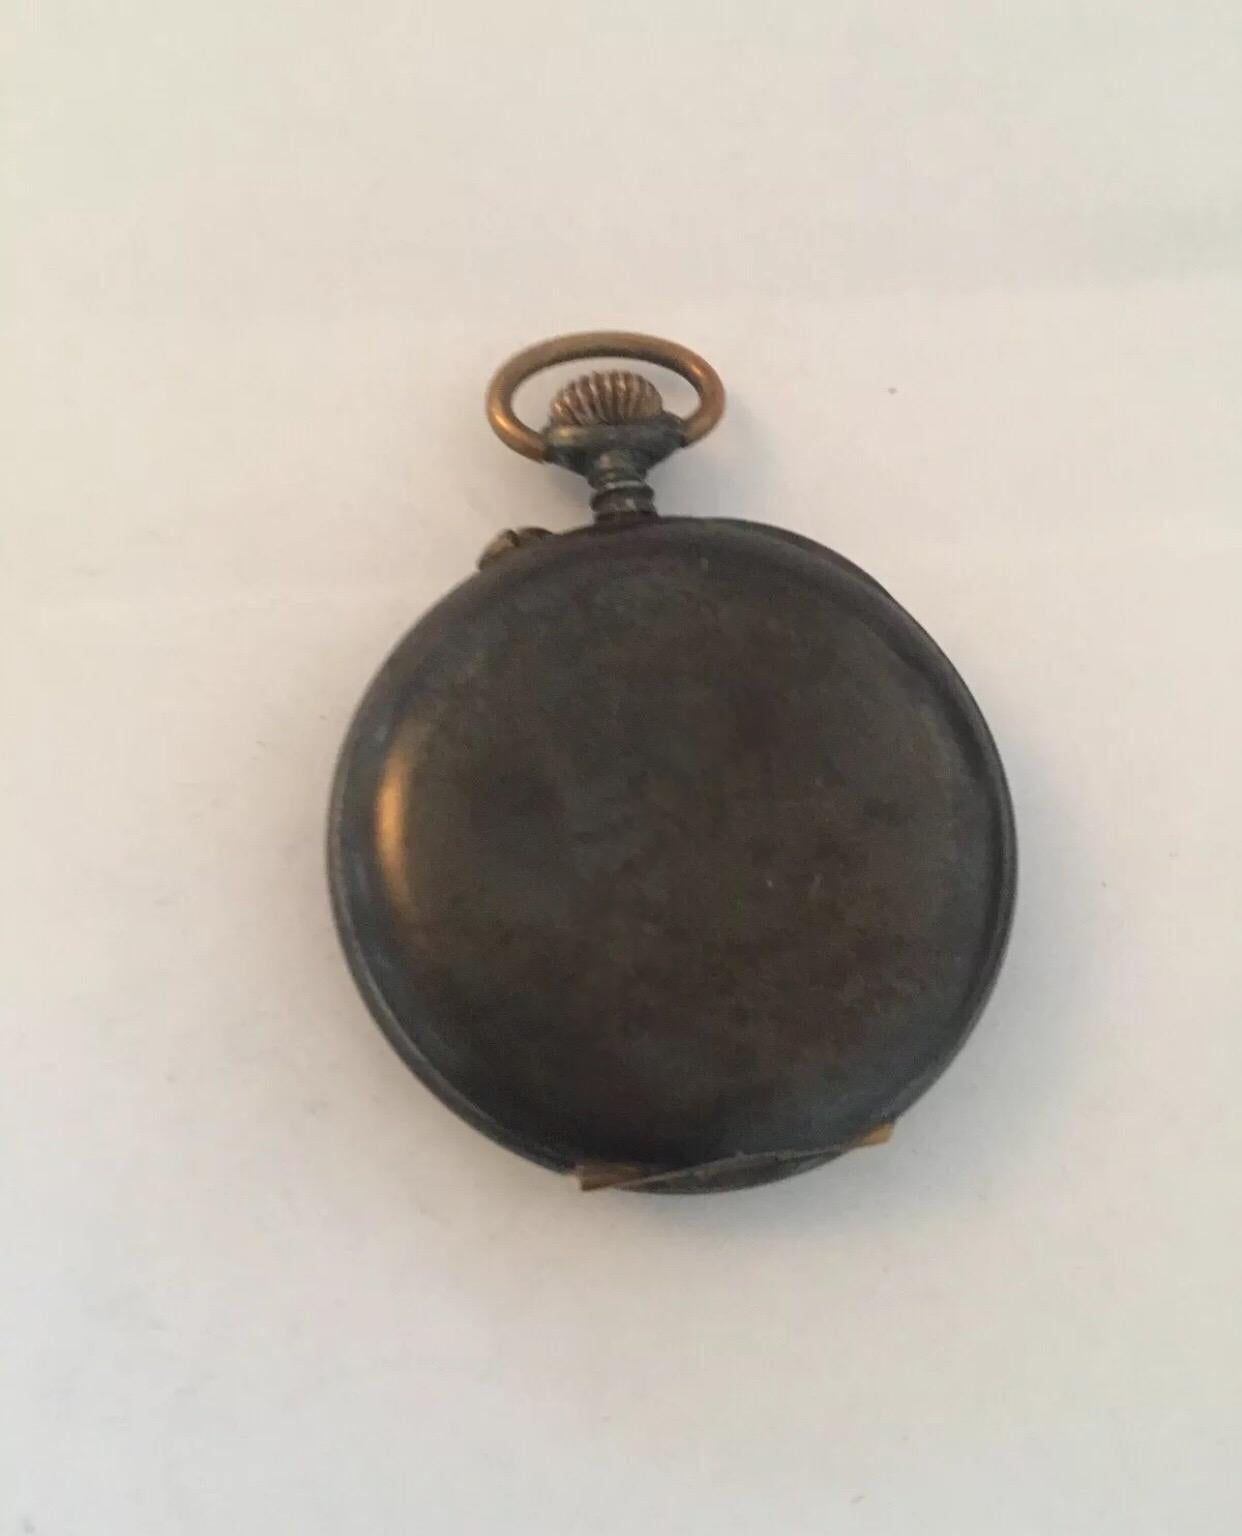 Antique Gunmetal Pocket watch. This watch is working and ticking well, but The hands needs adjustments. Minute hand touches the hour hand